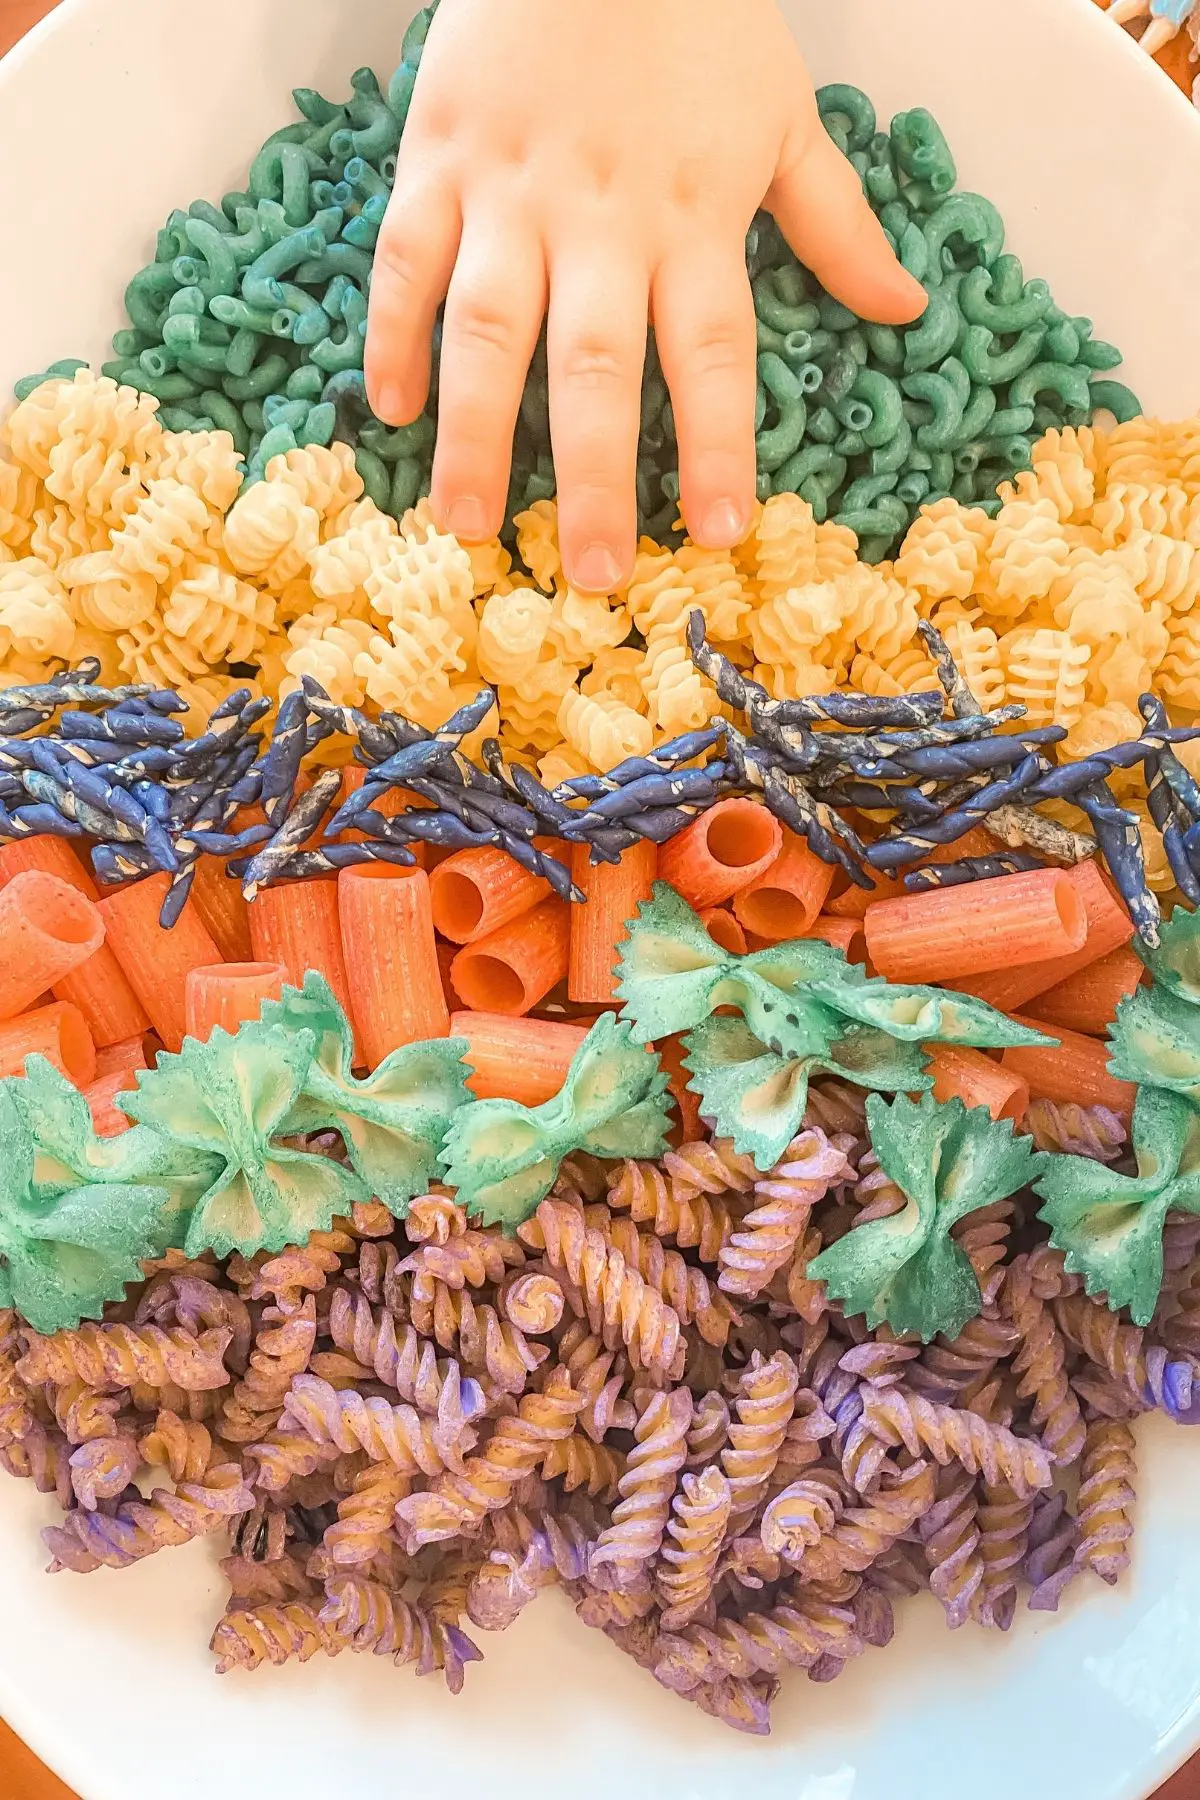 My son playing with primary colored pasta